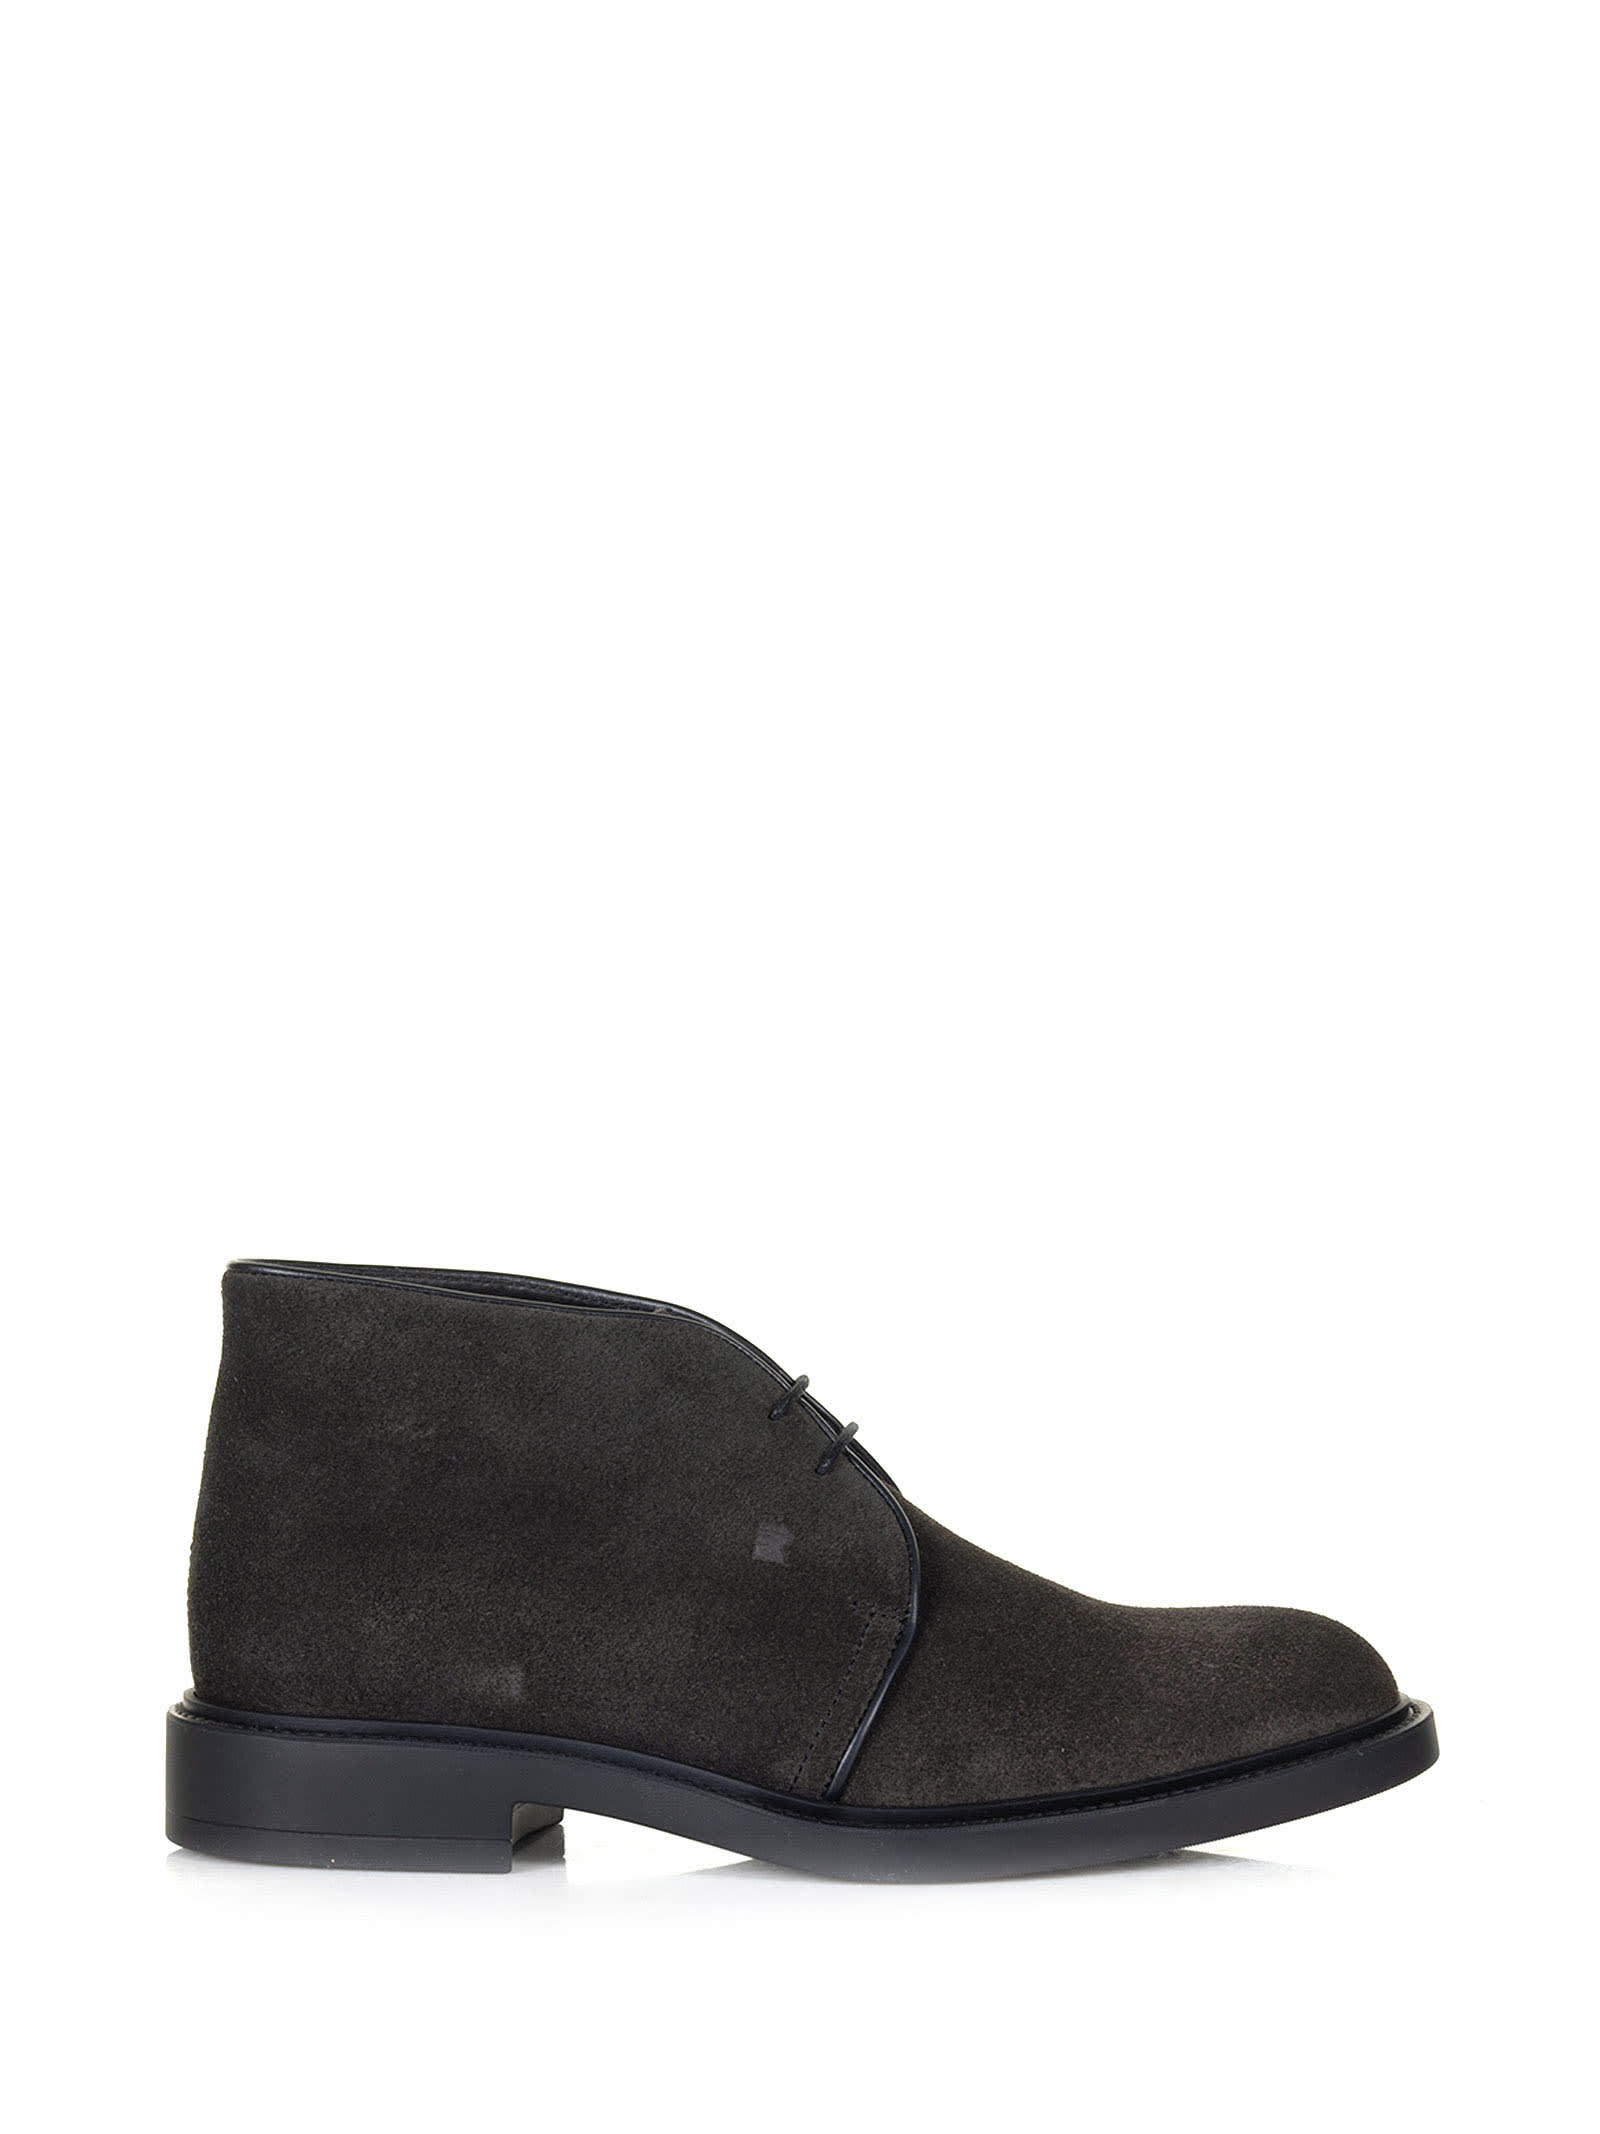 Fratelli Rossetti One Anthracite Suede Ankle Boot